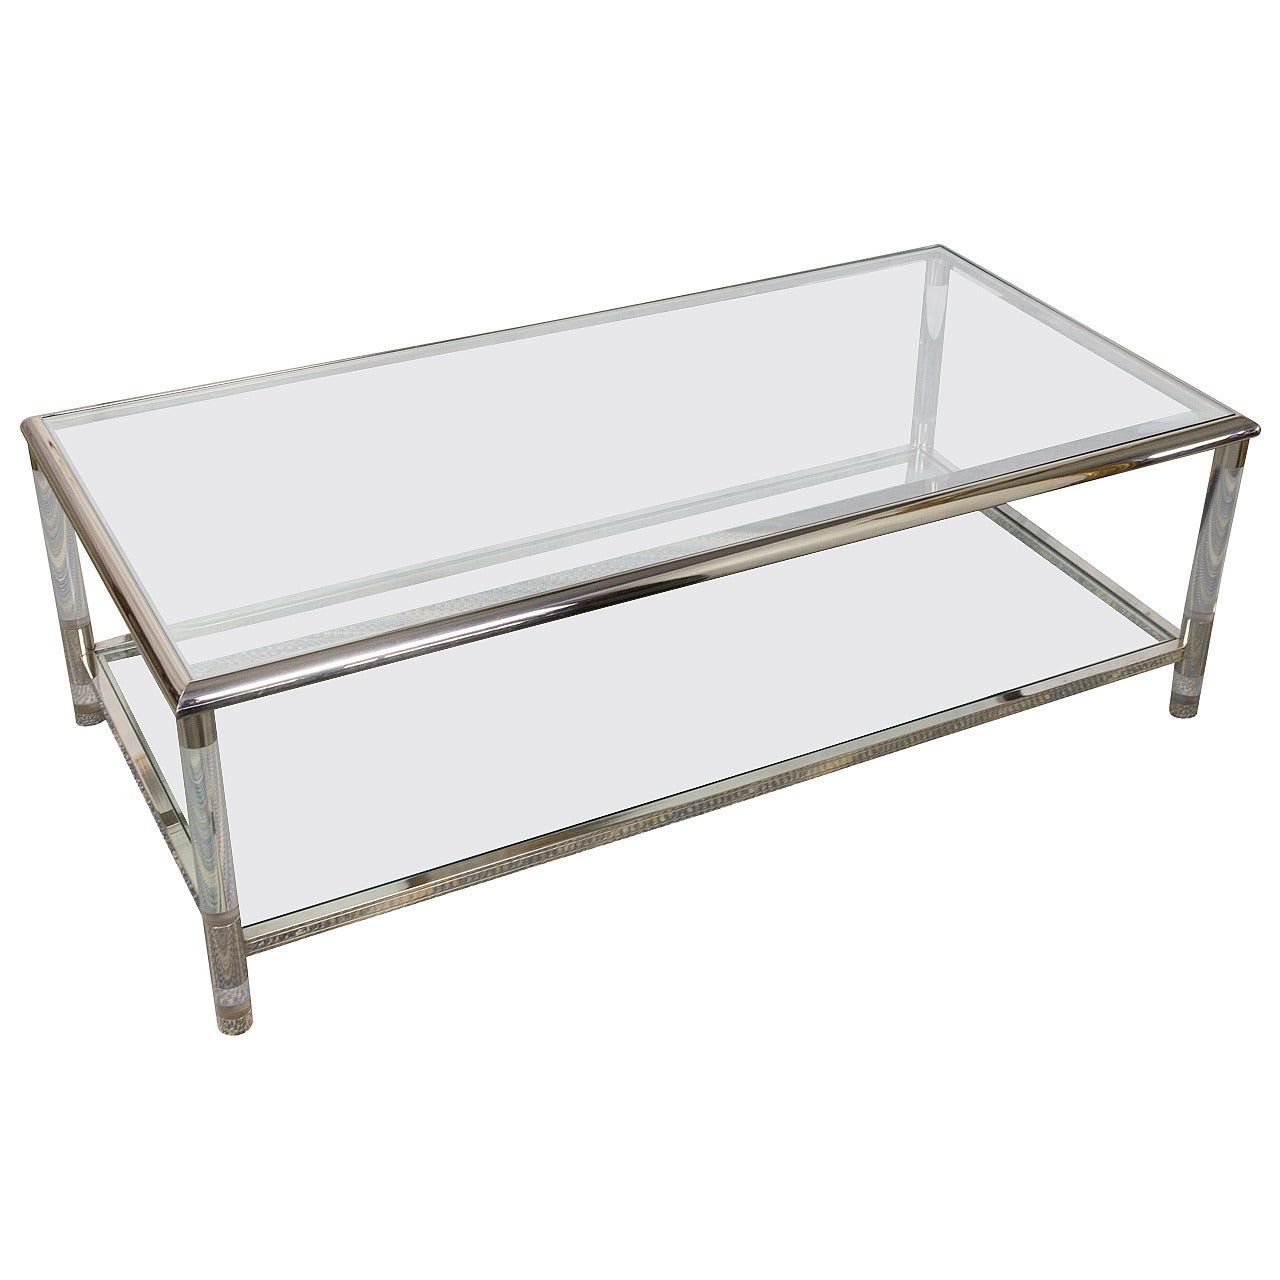 Mid-Century Modern Rectangular Lucite, Chrome and Glass Coffee Table